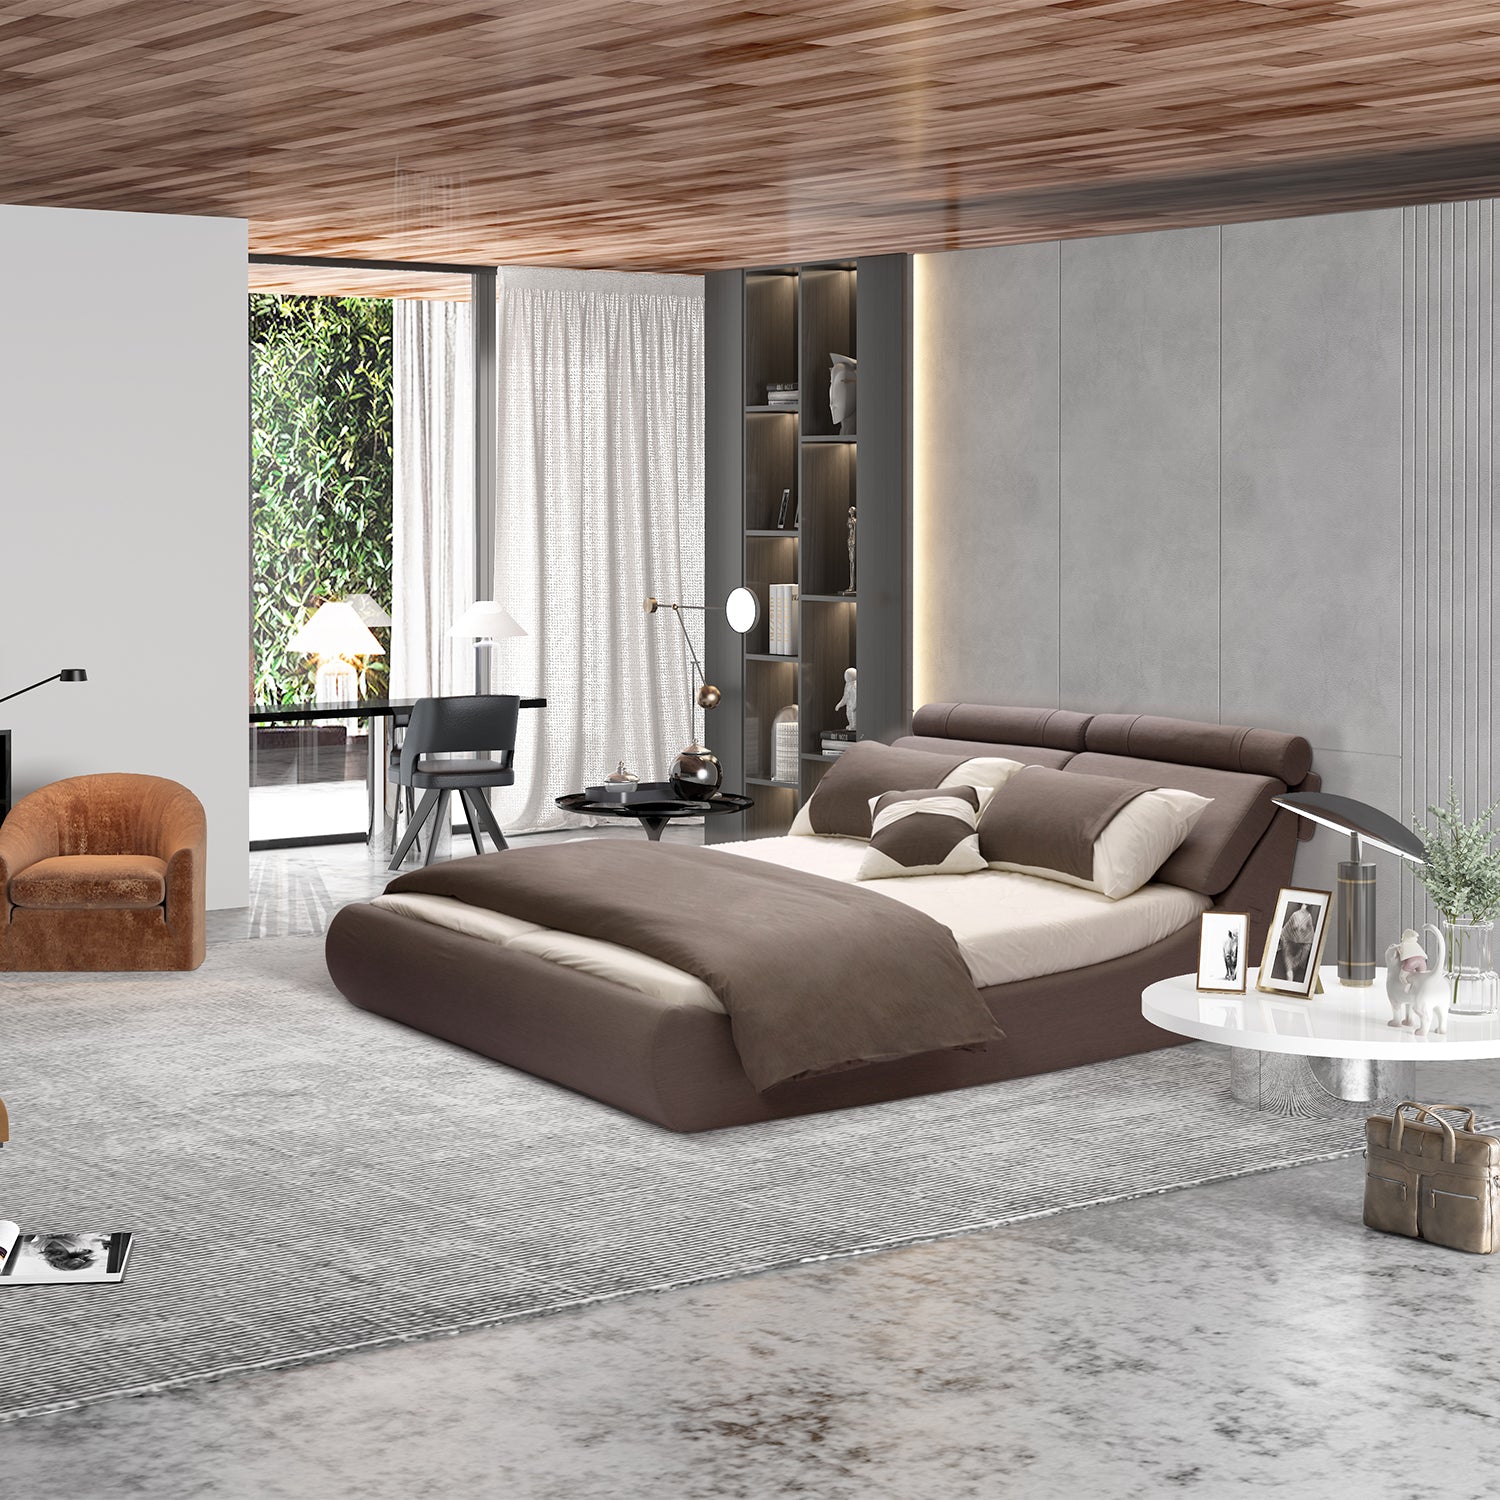 Modern spacious bedroom with sleek brown Bed Frame BZZ4 - 093C featuring clean lines, a cozy armchair, study desk by the window, and white round side table with plants and framed pictures.